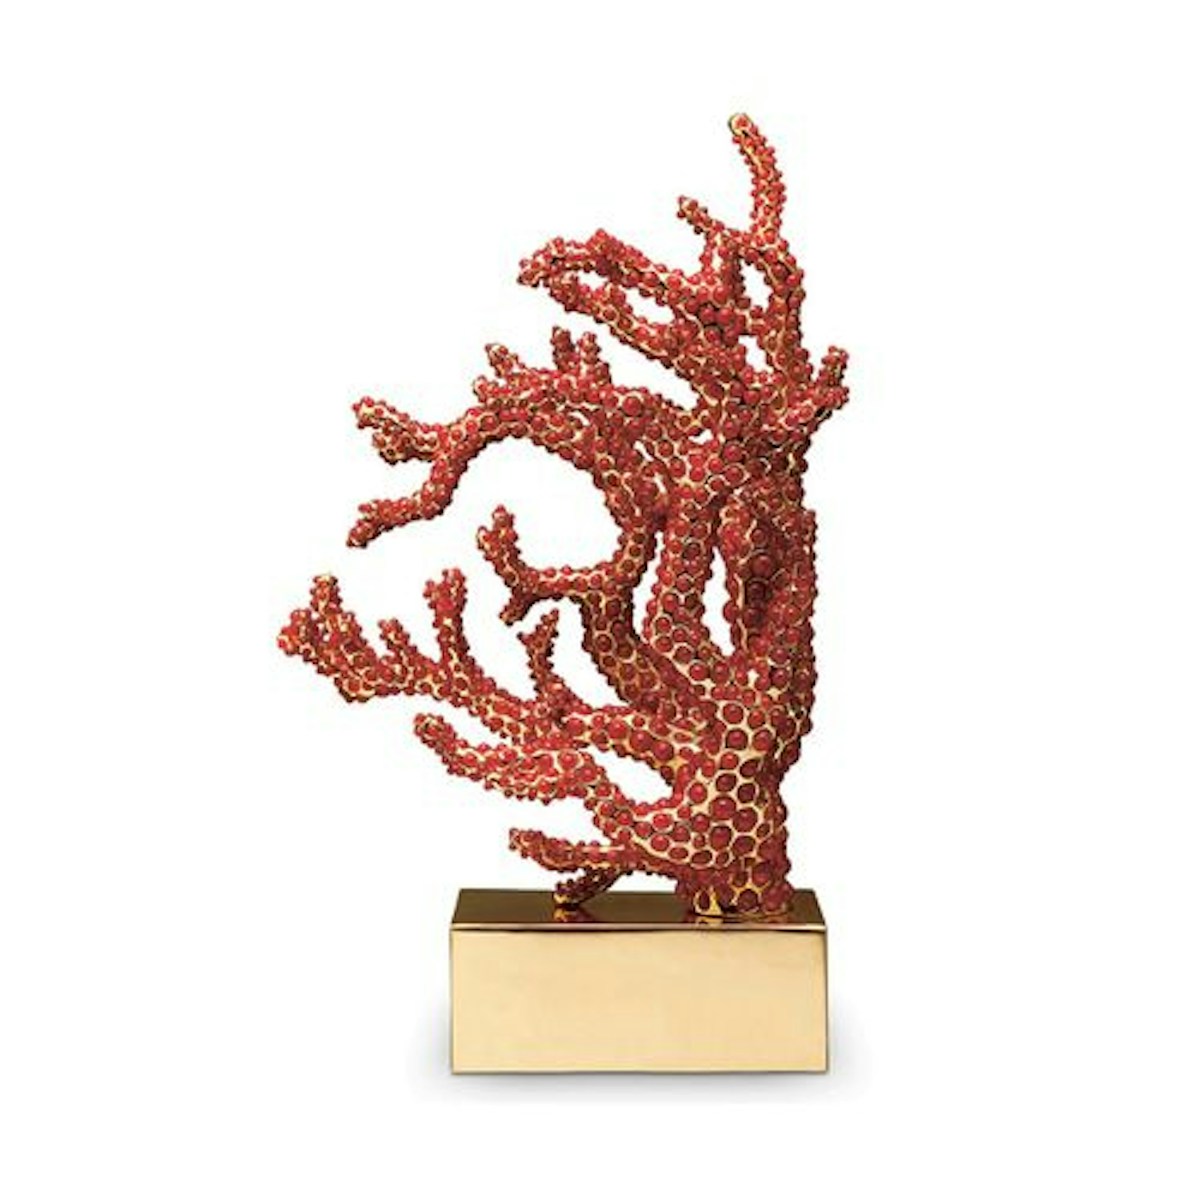 Coral Bookend - 6 Best Coral Decor Ideas To Buy For Your Home - LuxDeco.com